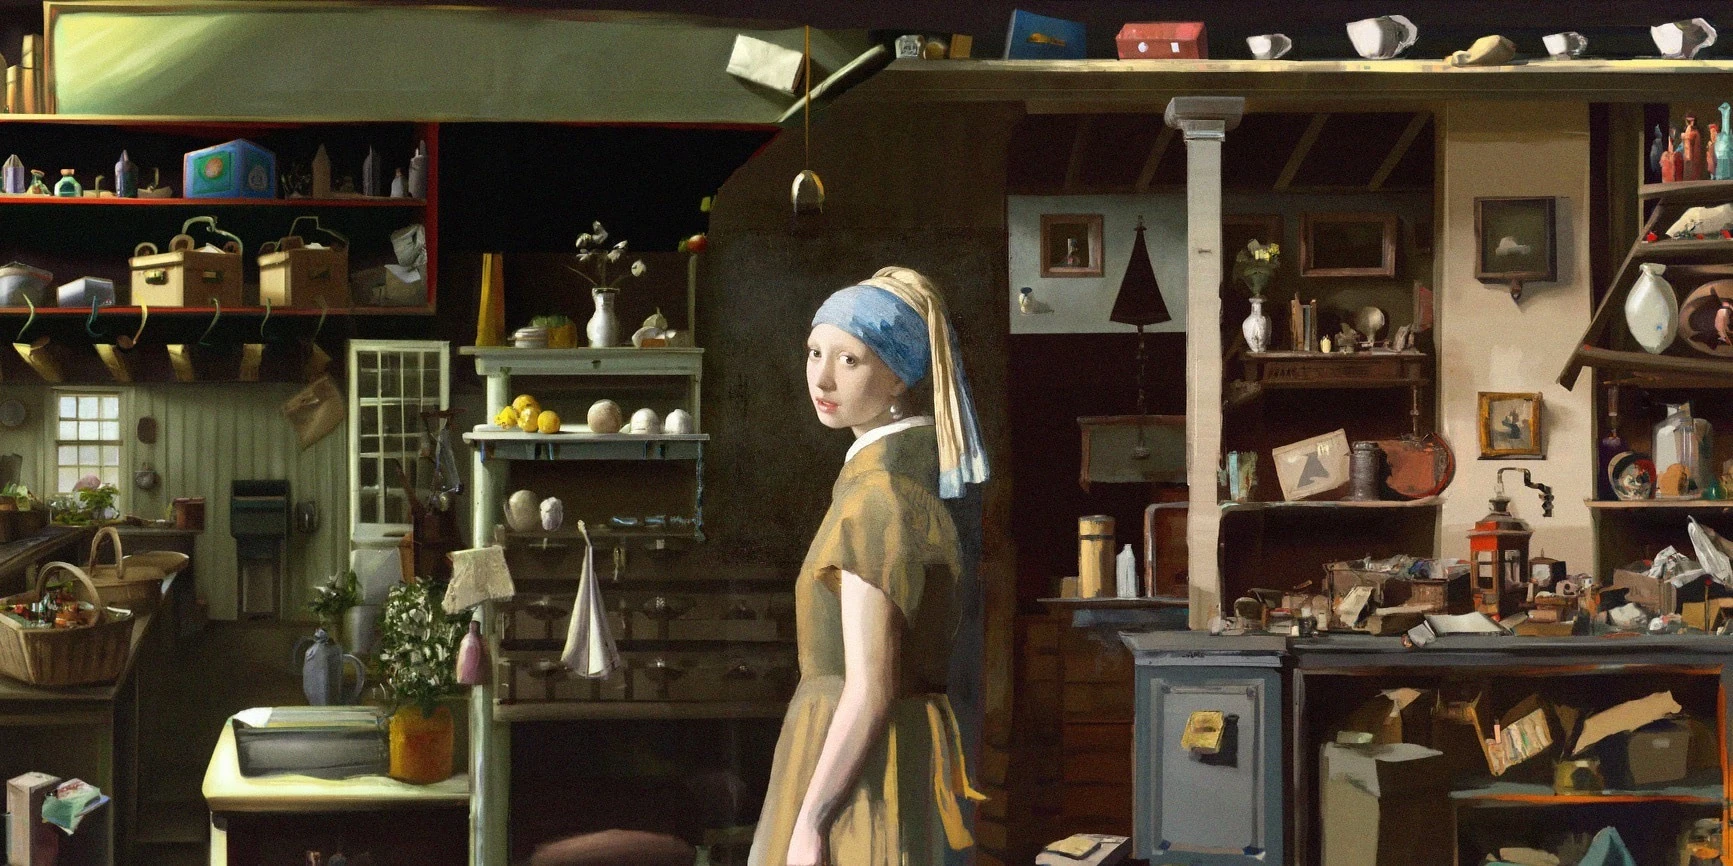 August Kamp × DALL·E, outpainted from Girl with a Pearl Earring by Johannes Vermeer